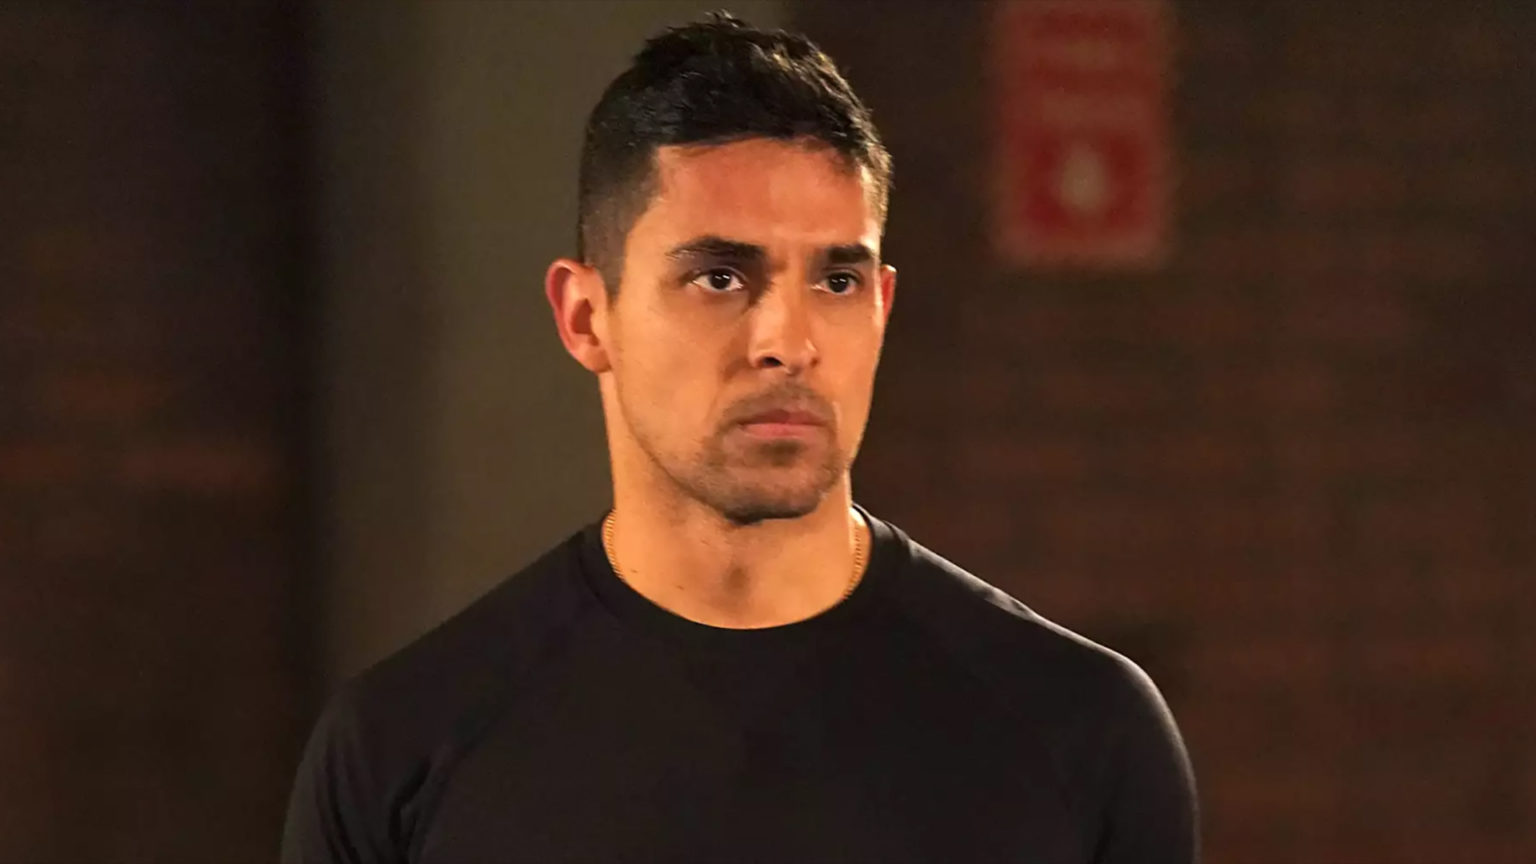 Agent Nick Torres of NCIS set to leave after season 19 as actor